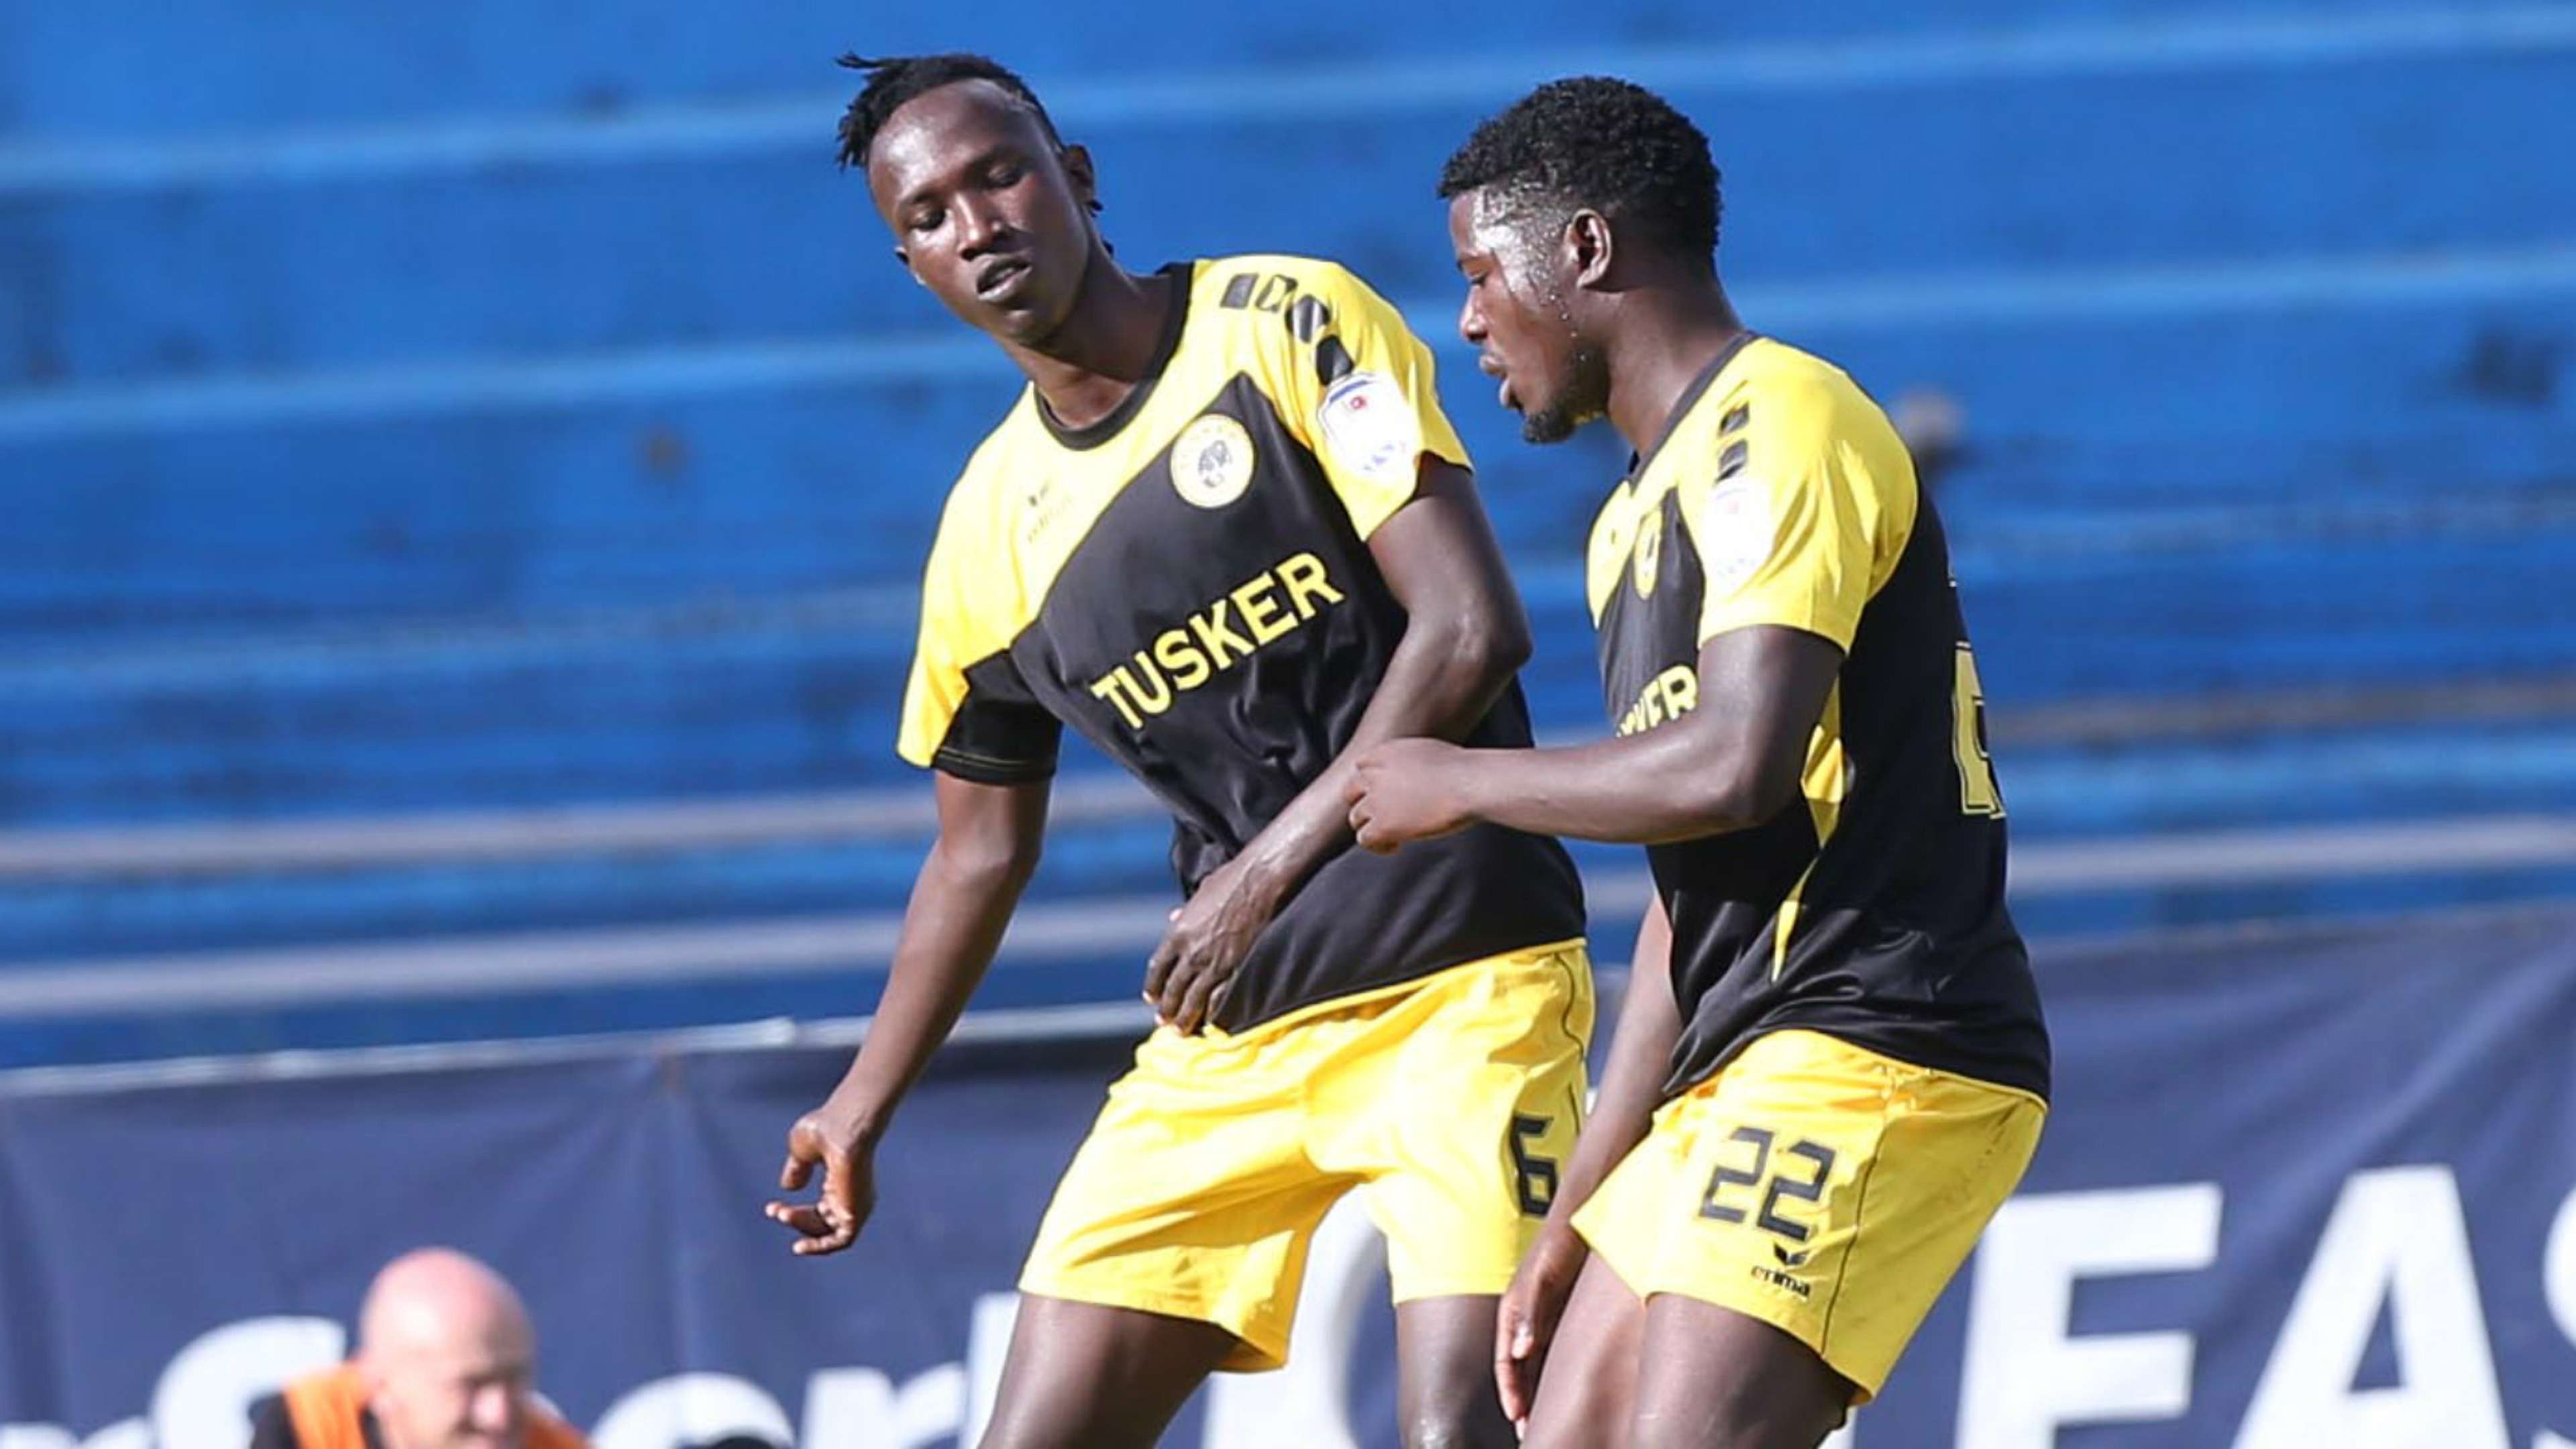 The substitution paid off as Allan Wanga scored Tusker's winning goal from a free-kick